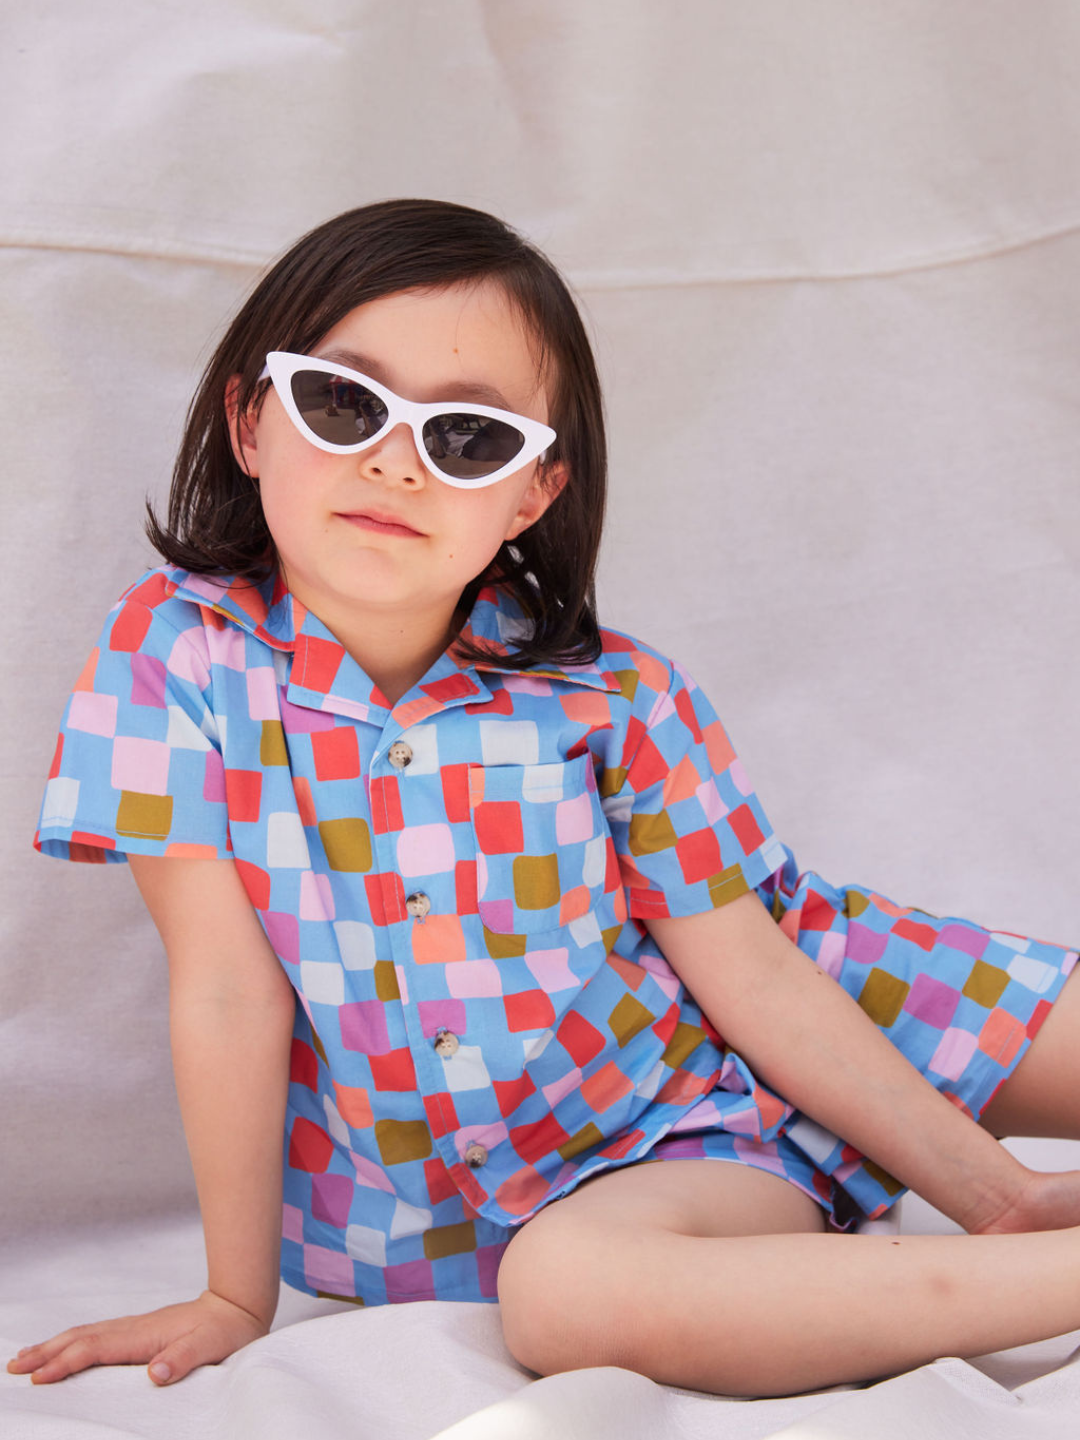 White | A child wearing the white Stingray kids Sunglasses. She is seated on a beige cloth backdrop and wears a blue shorts set patterned with multicolored squares.